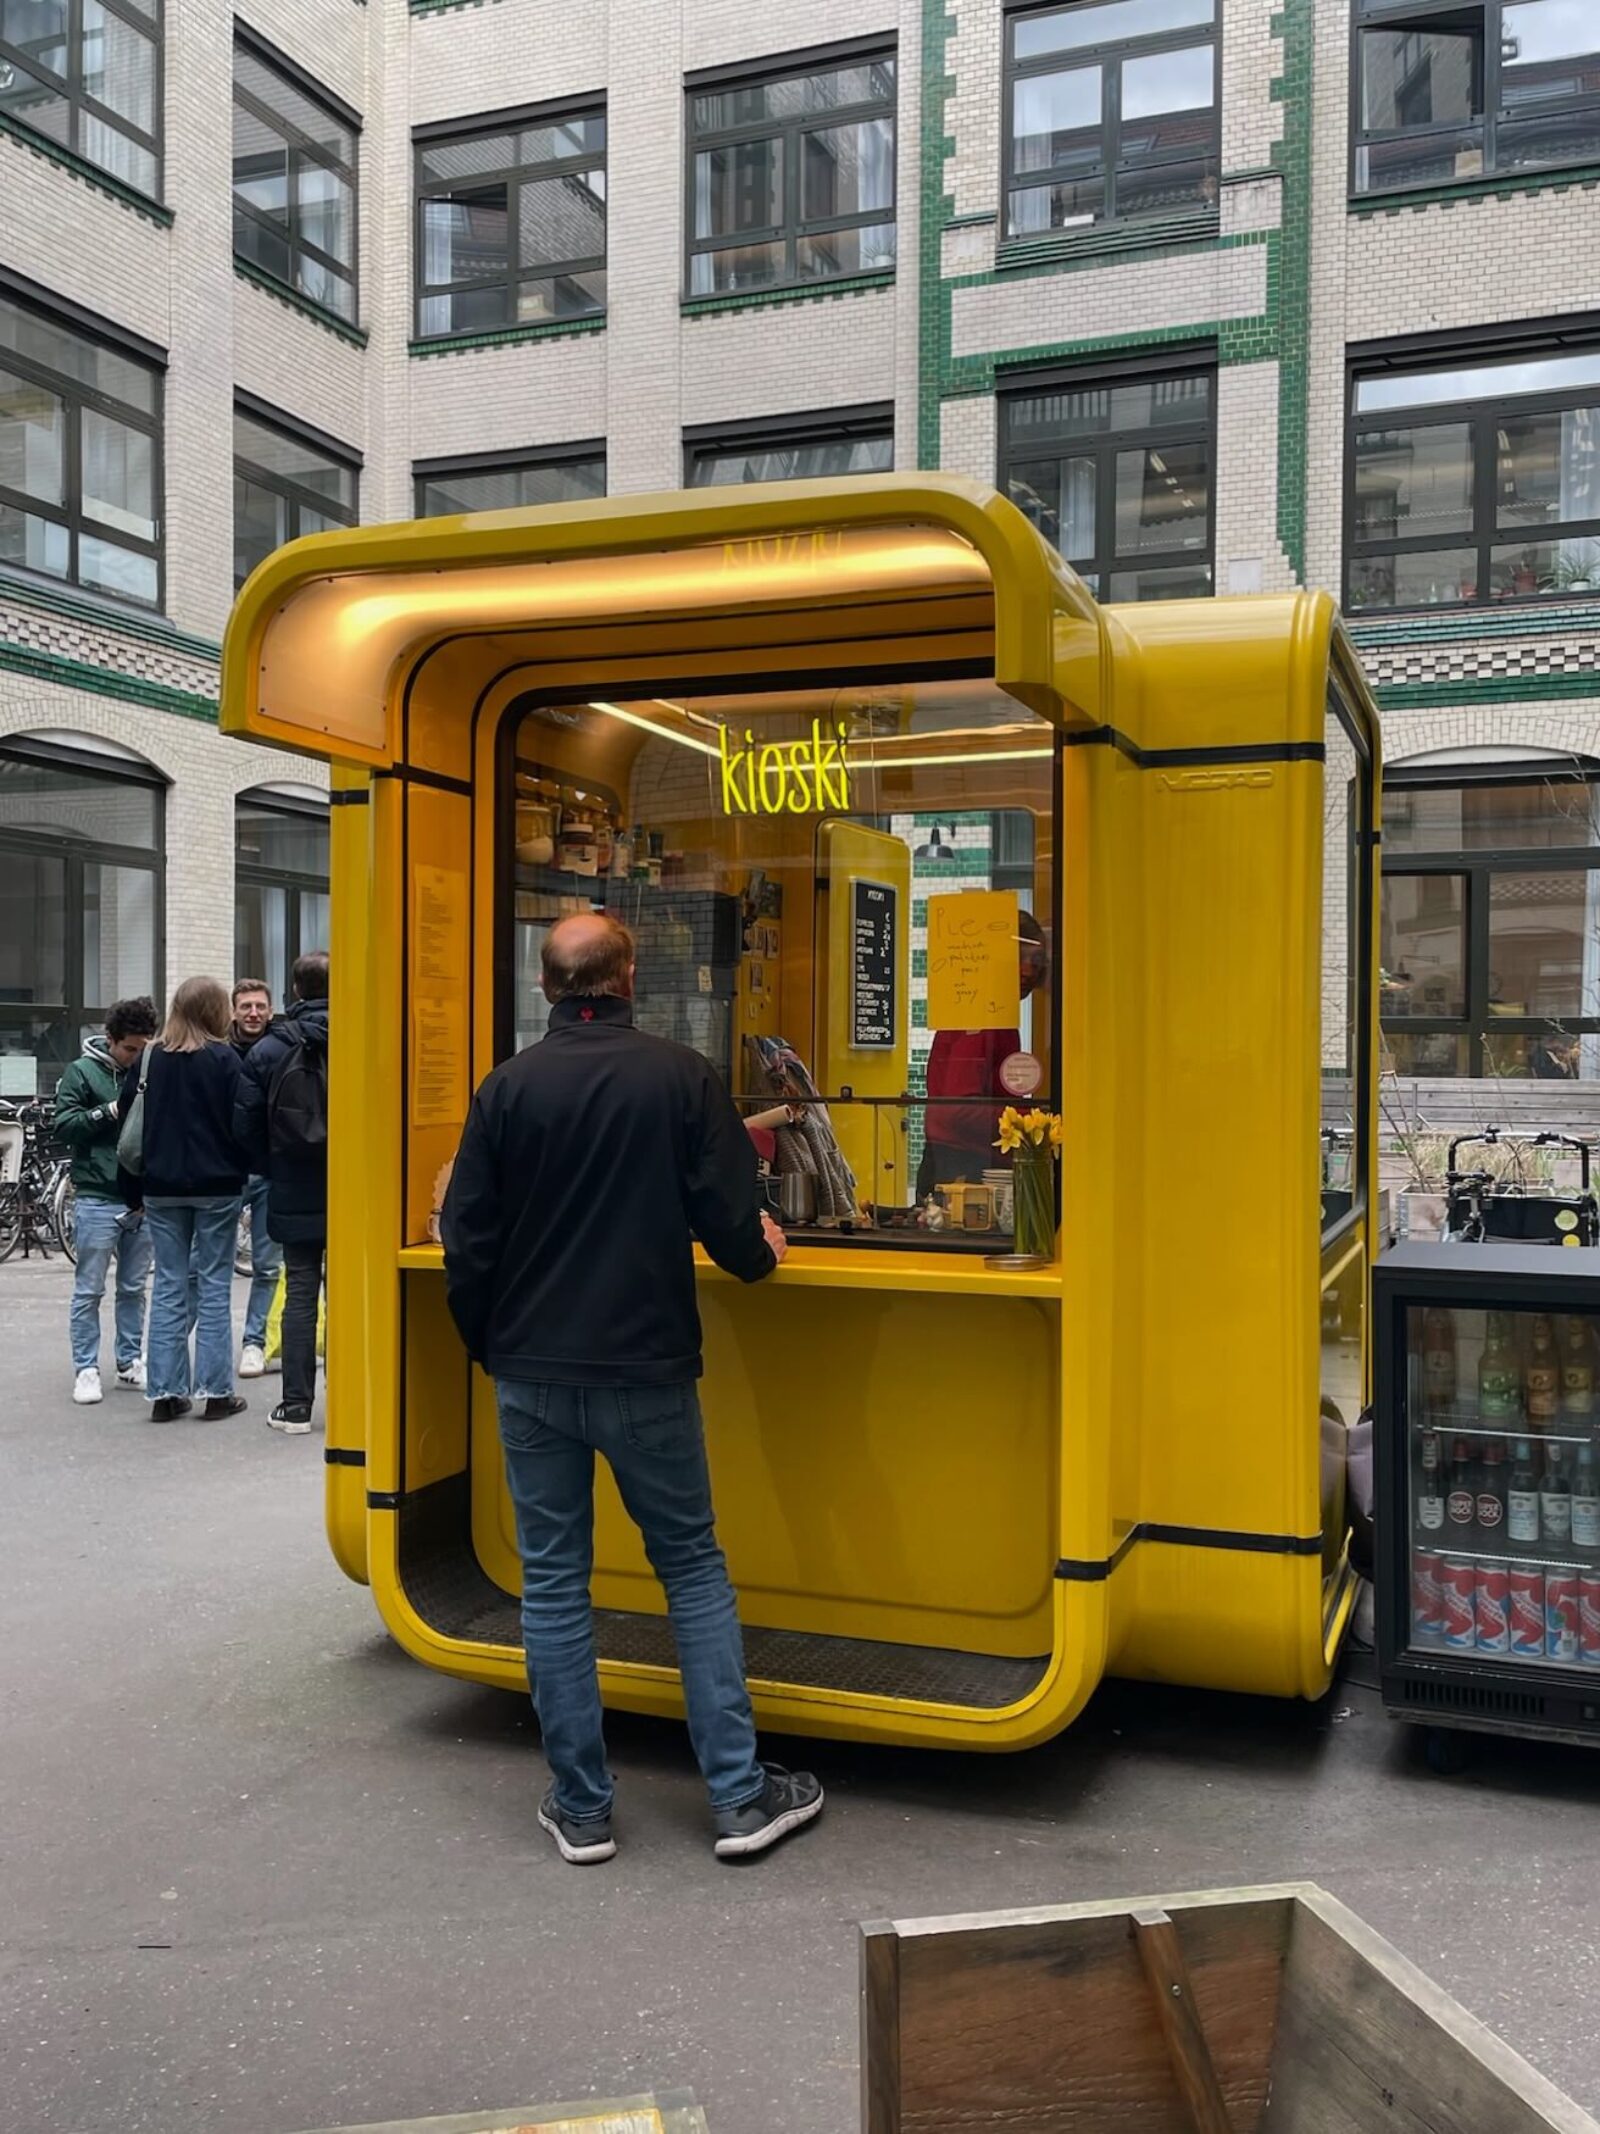 A small modular kiosk in a backyard in Berlin, with a person ordering some coffee